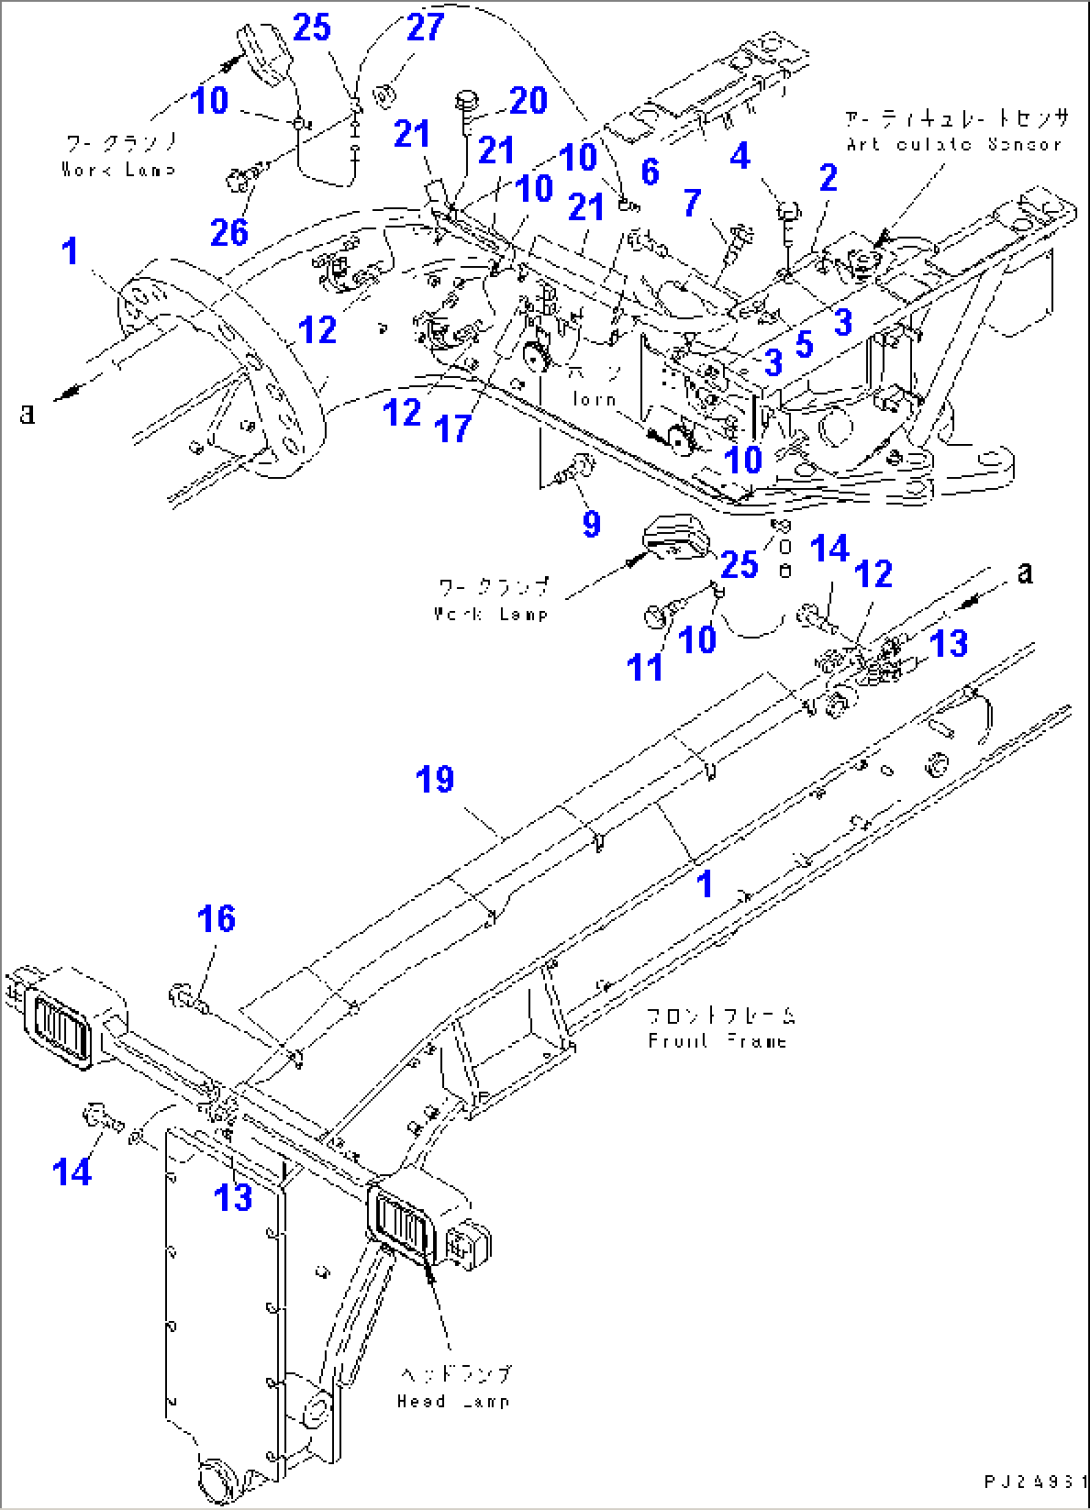 FRONT FRAME HARNESS(#51001-)